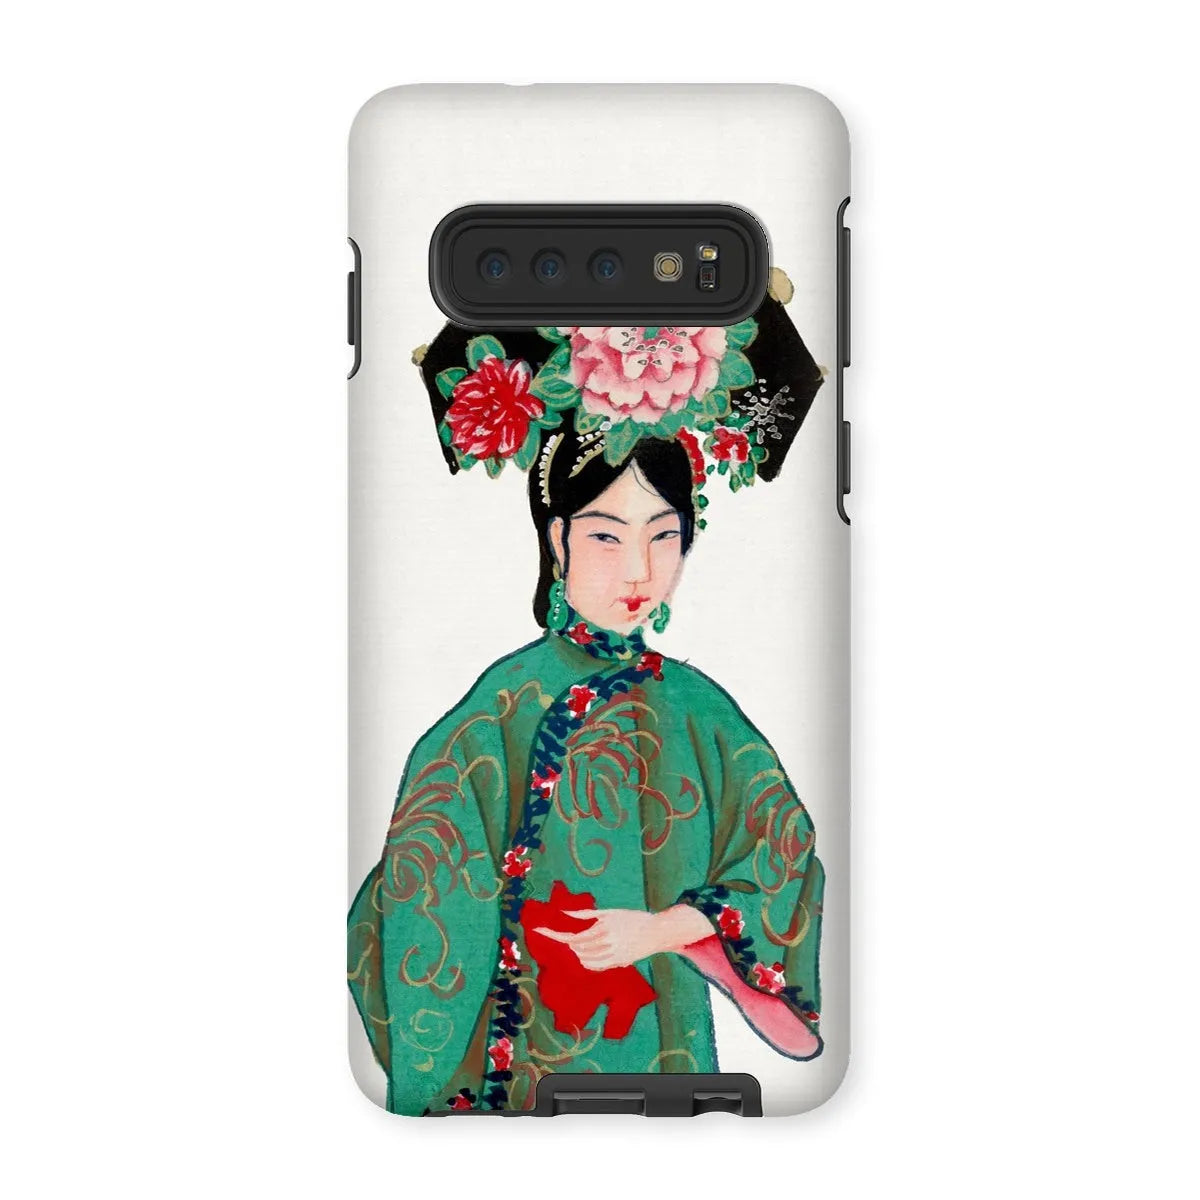 Chinese Noblewoman In Manchu Couture Art Phone Case - Samsung Galaxy S10 / Matte - Mobile Phone Cases - Aesthetic Art